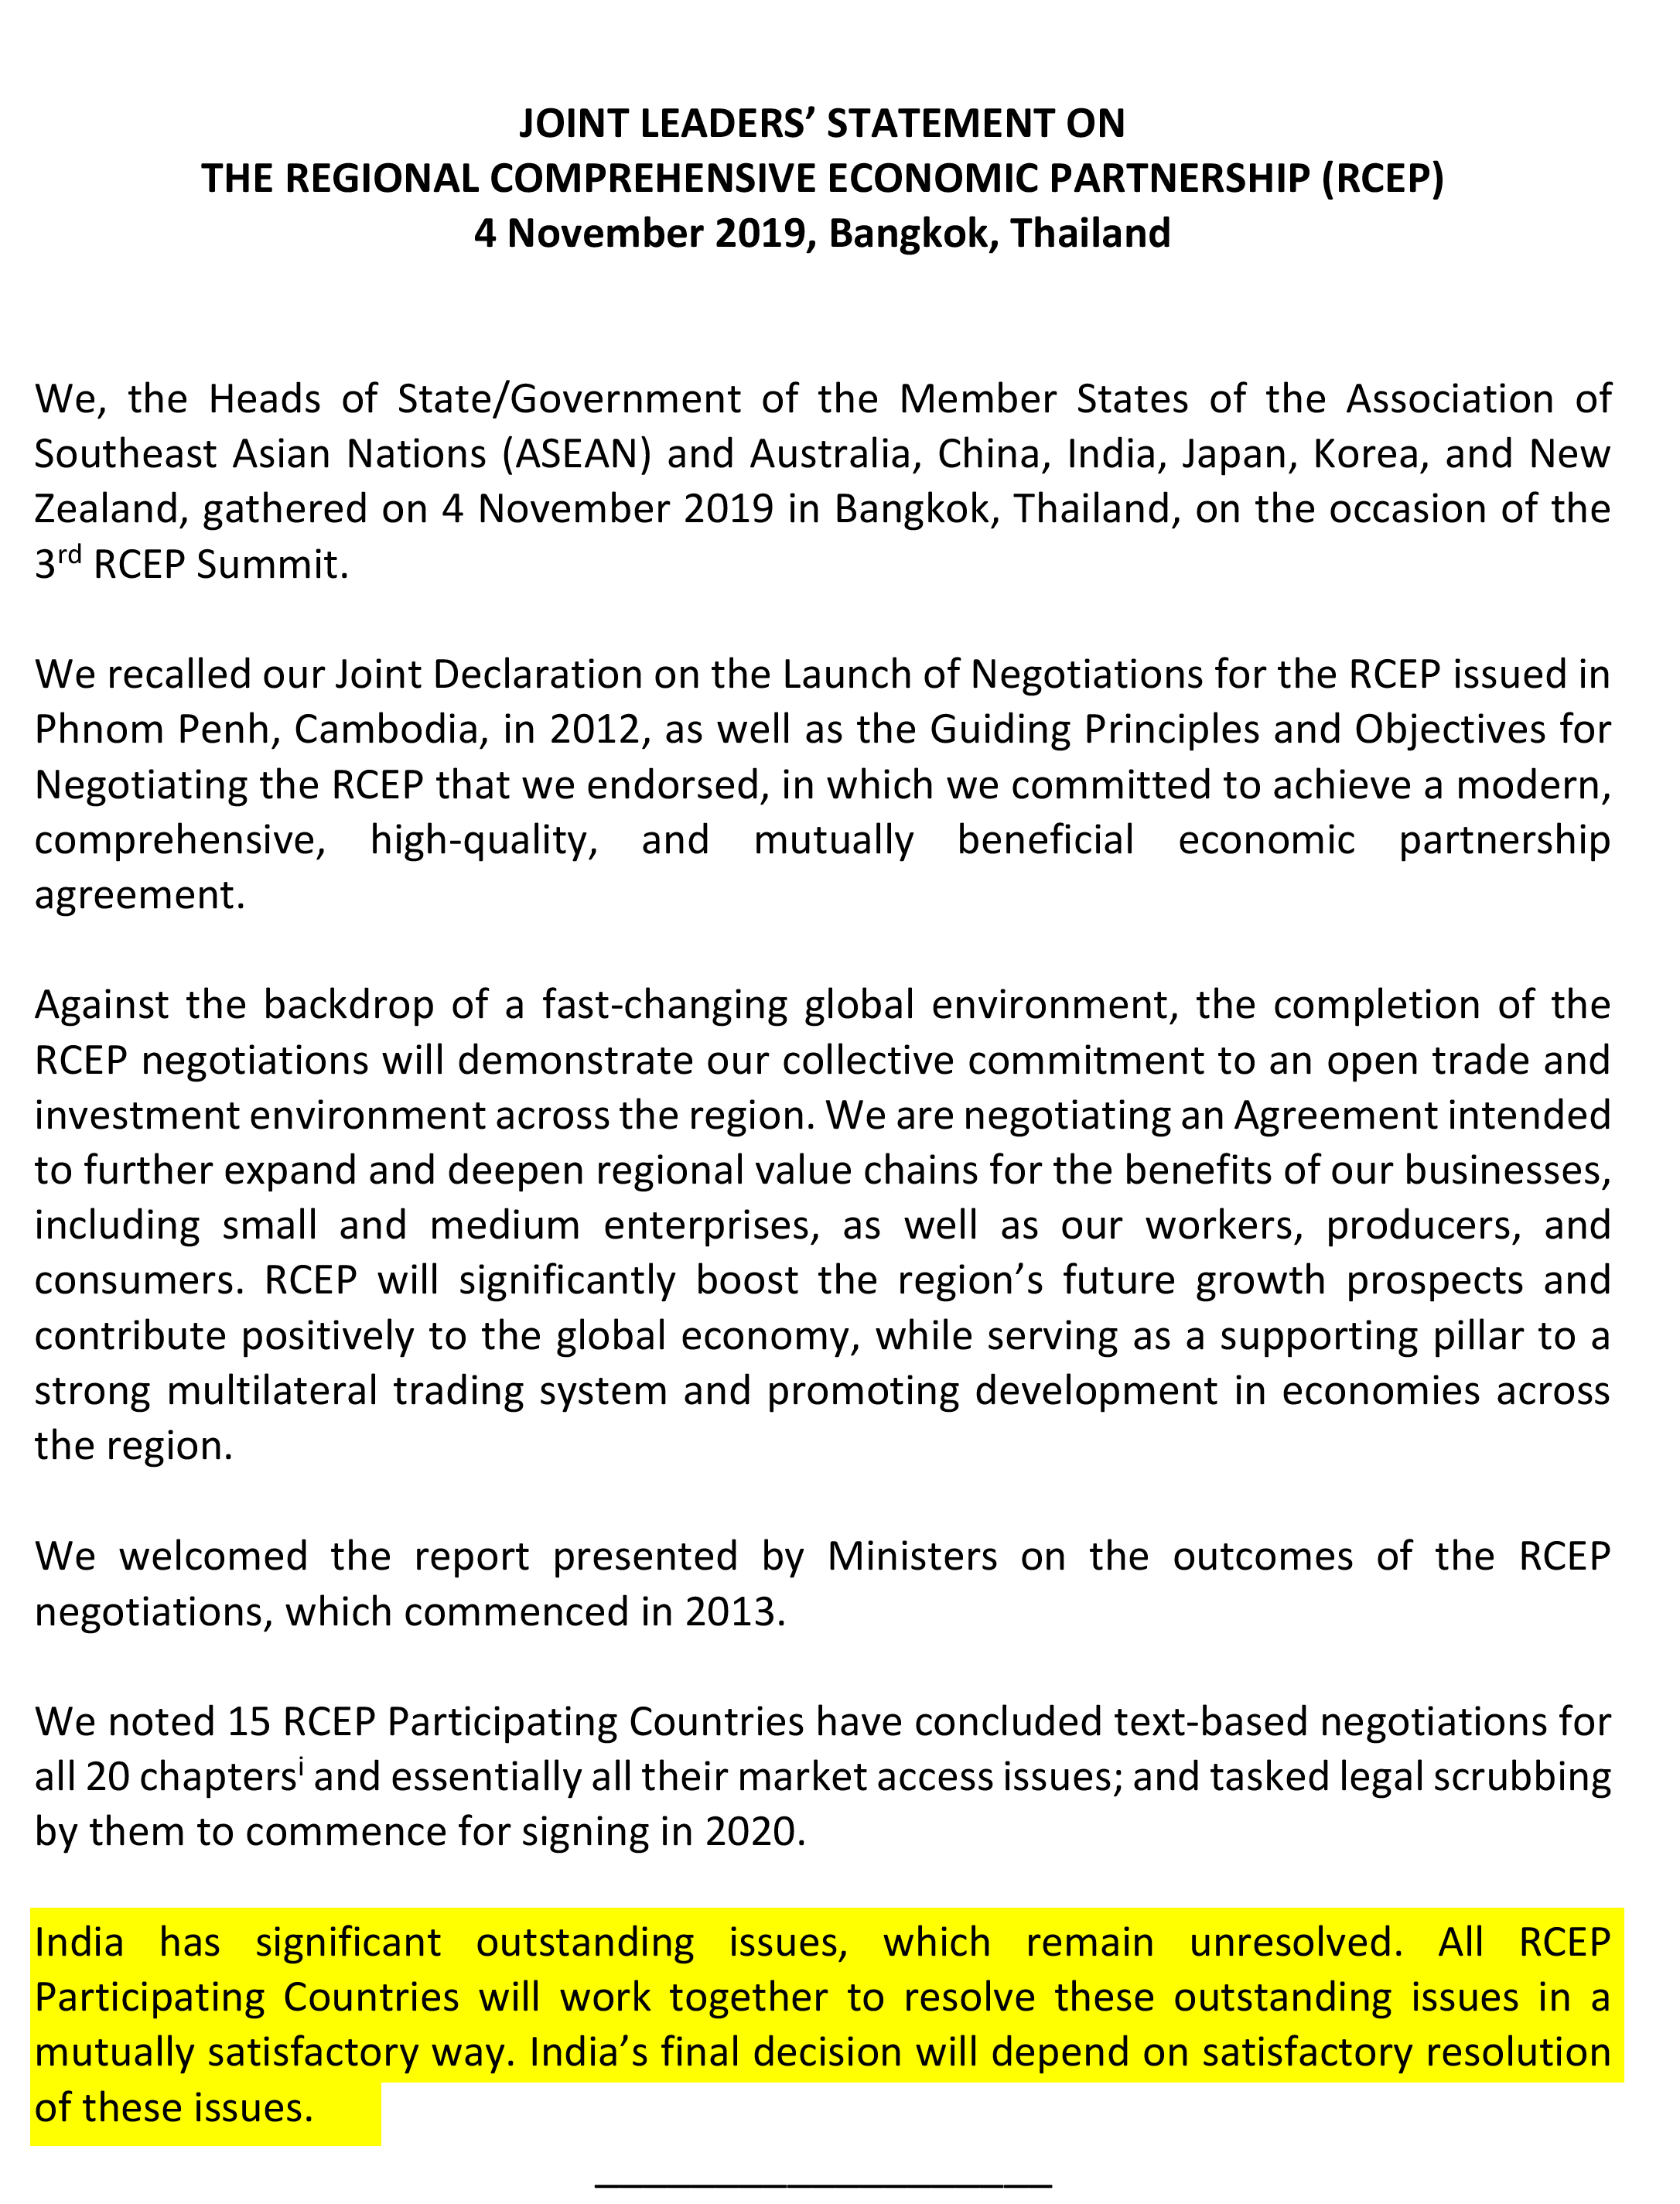 Joint leader's statement on RCEP